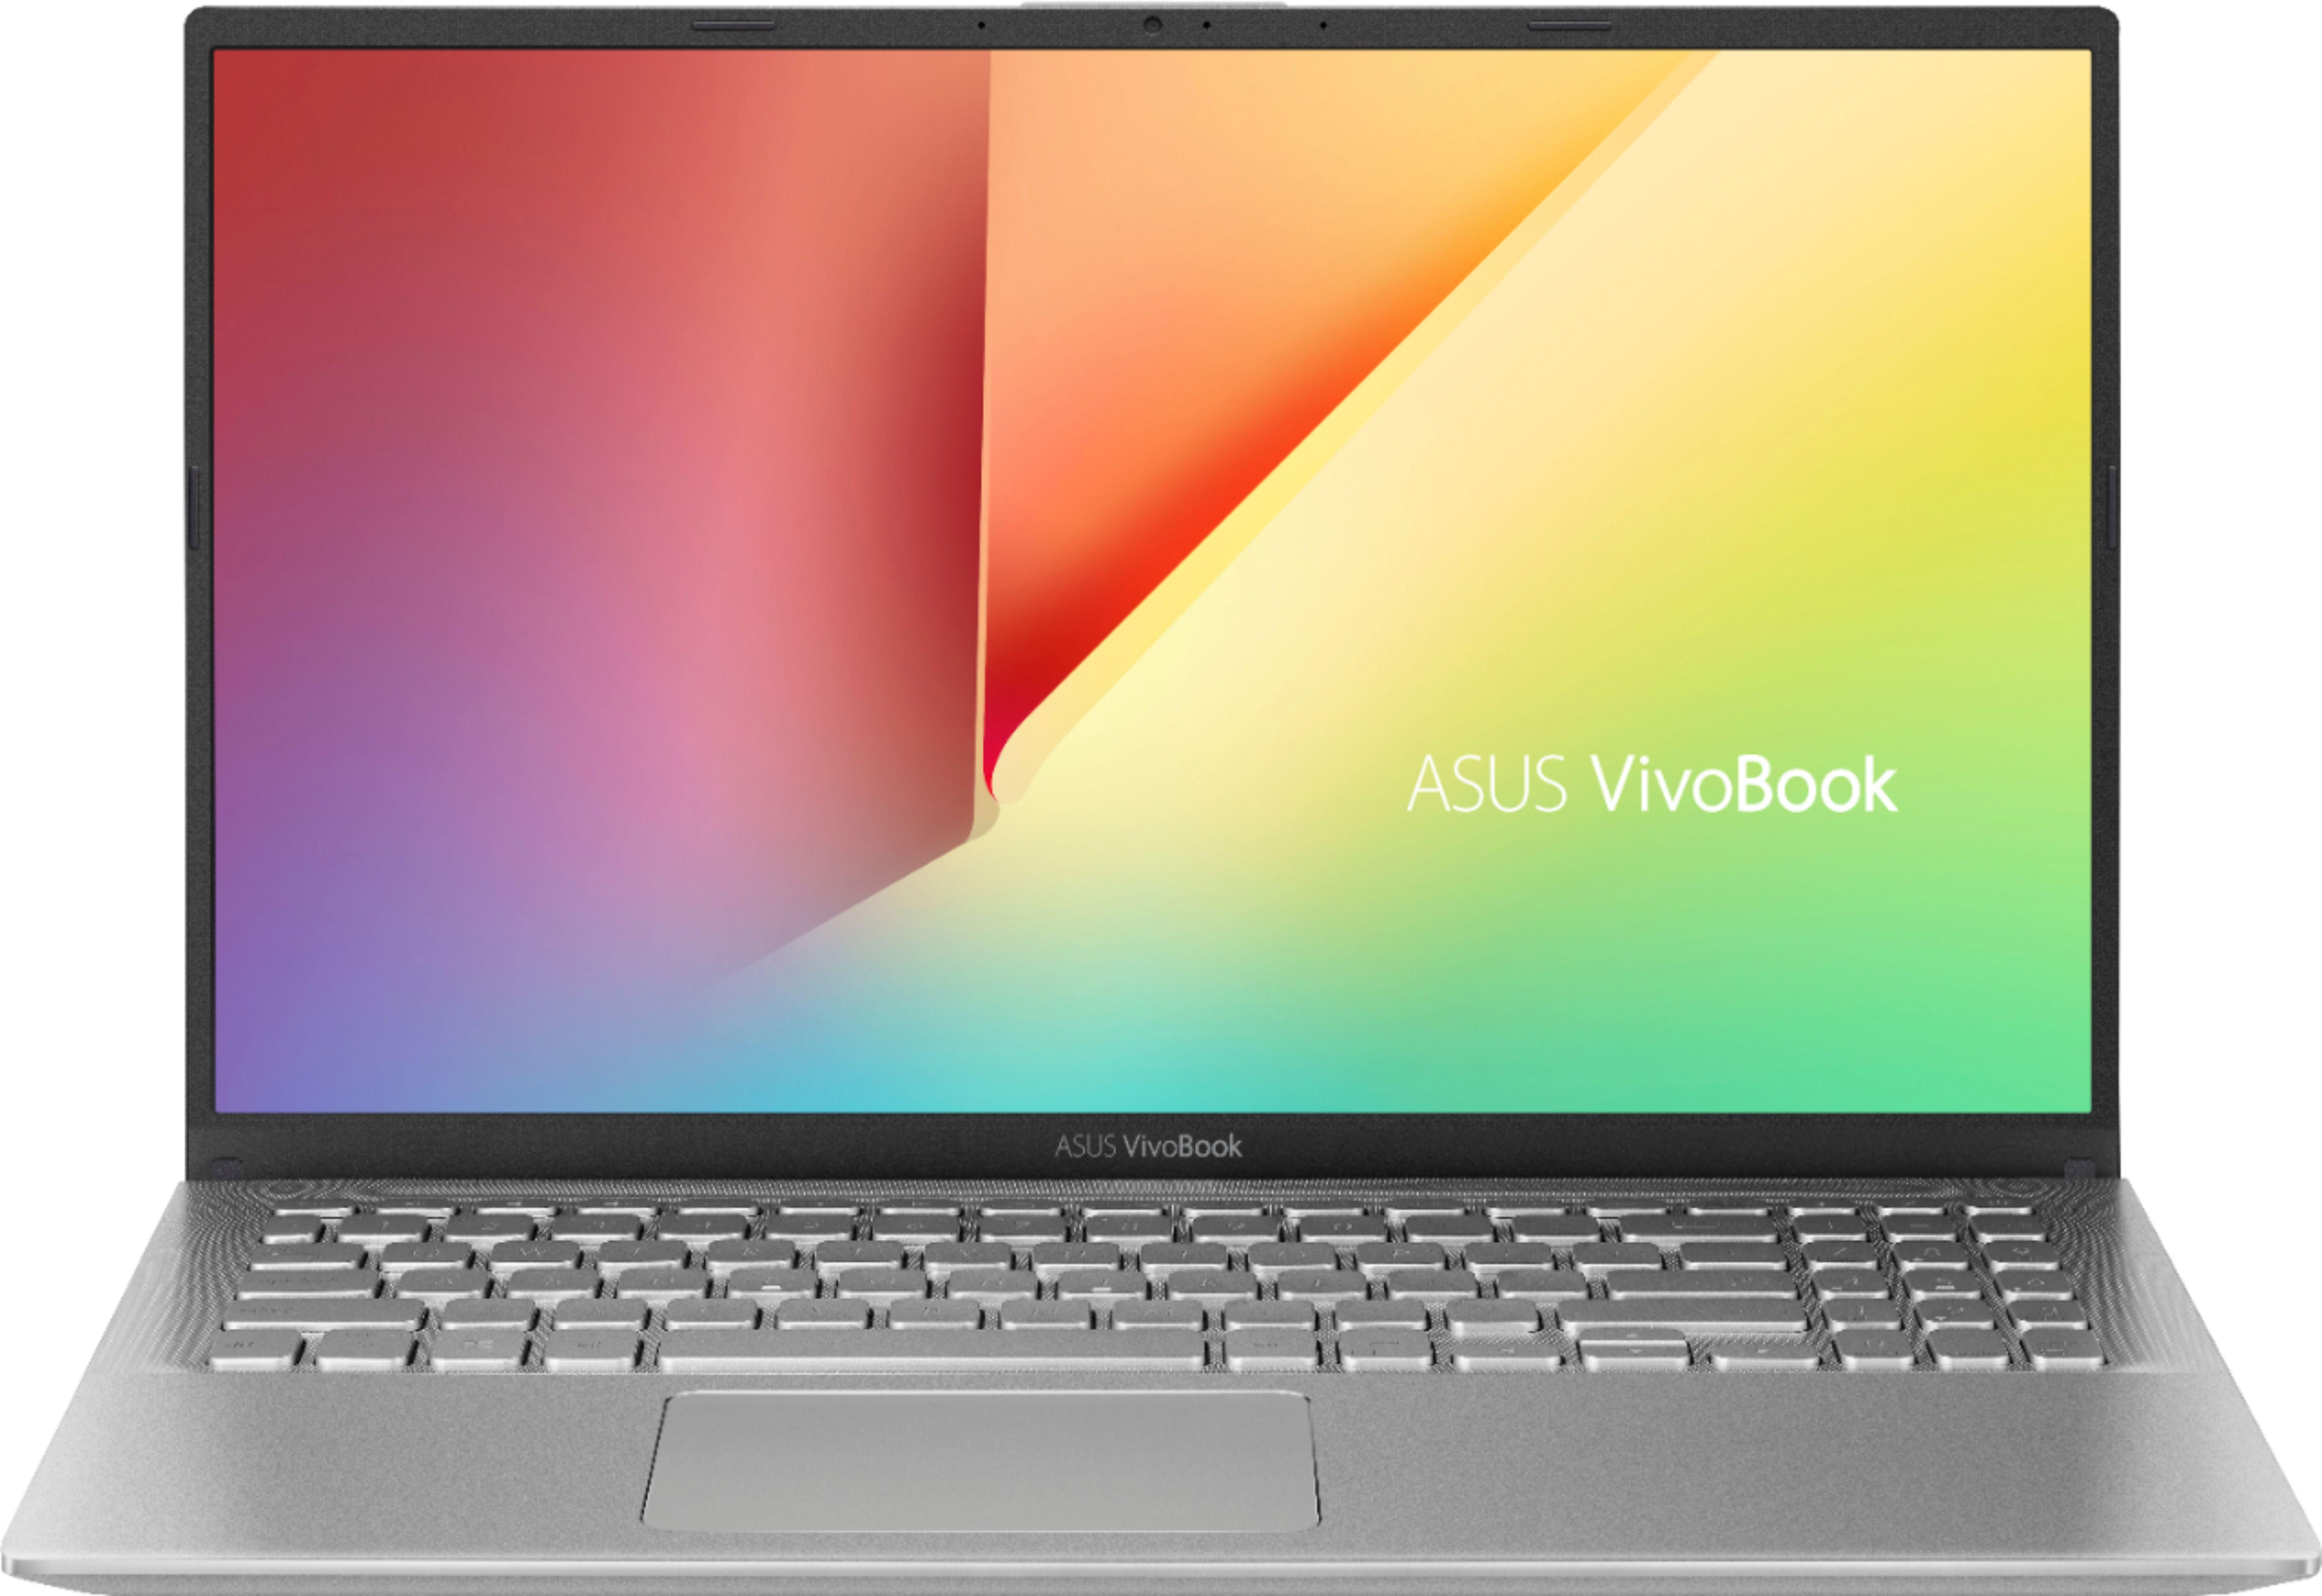 Asus Vivobook 15.6in AMD Ryzen 7 12GB 512GB Notebook Laptop for $499.99 Shipped